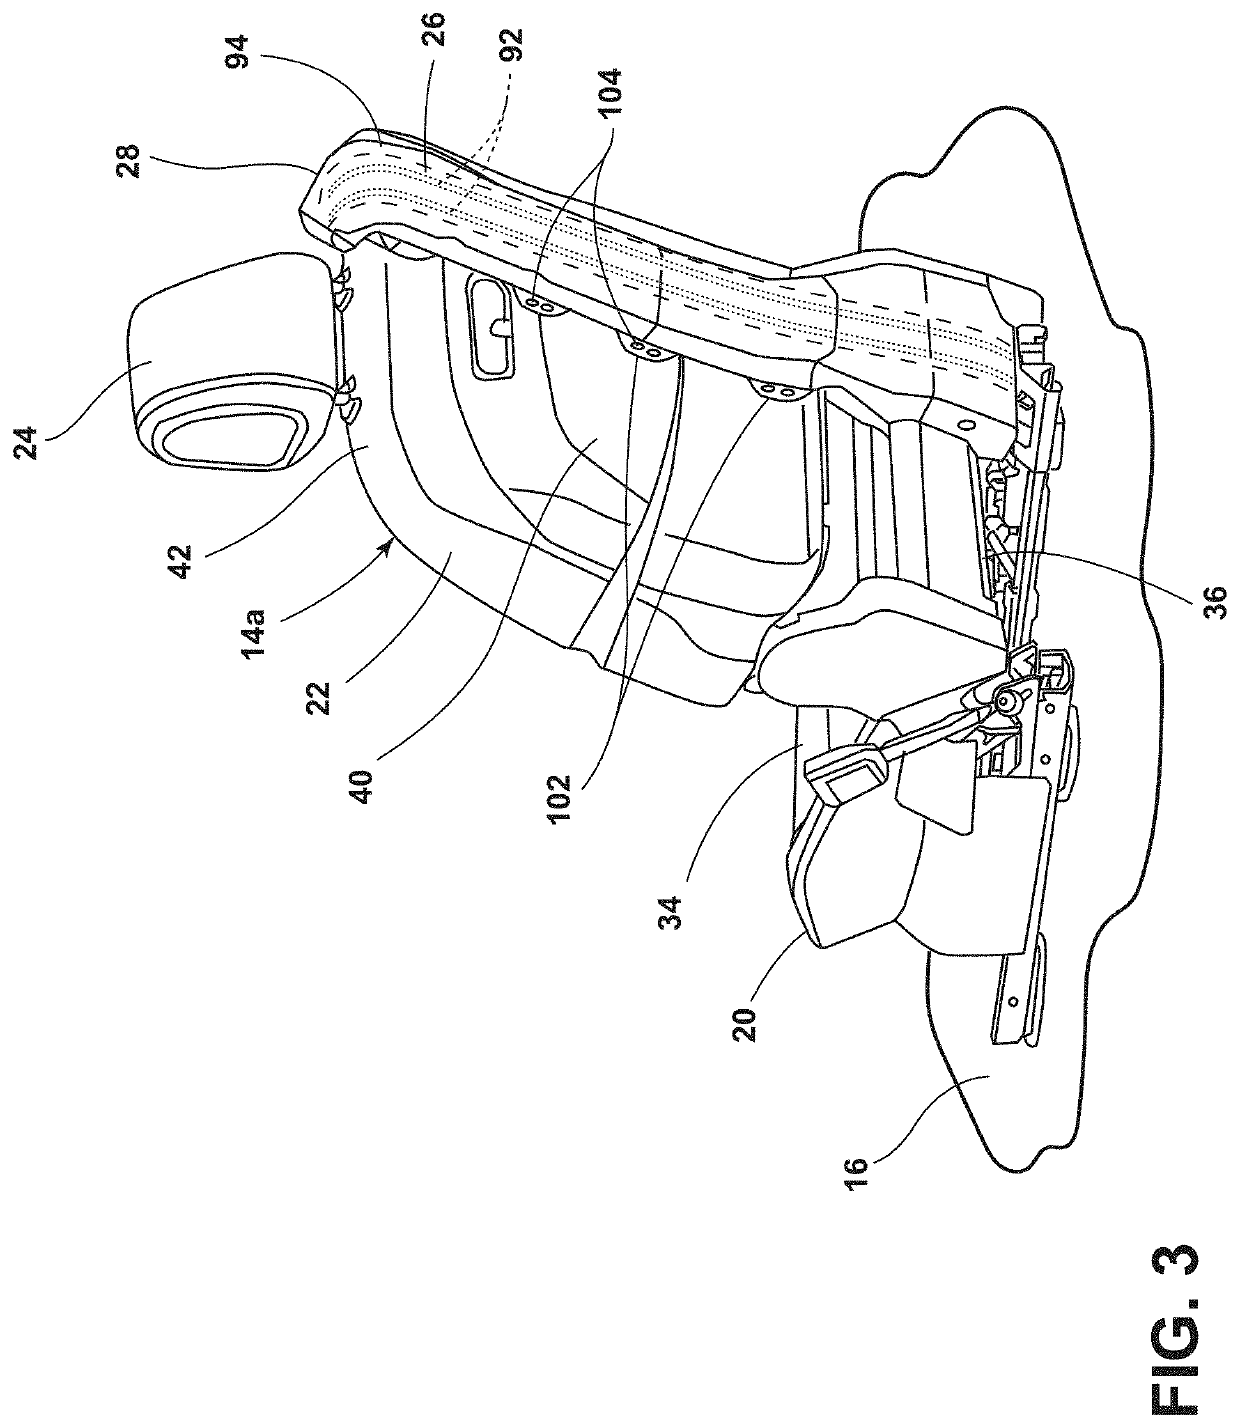 Seating assembly for a vehicle with emitters of ultraviolet c radiation to disinfect seatbelt webbing